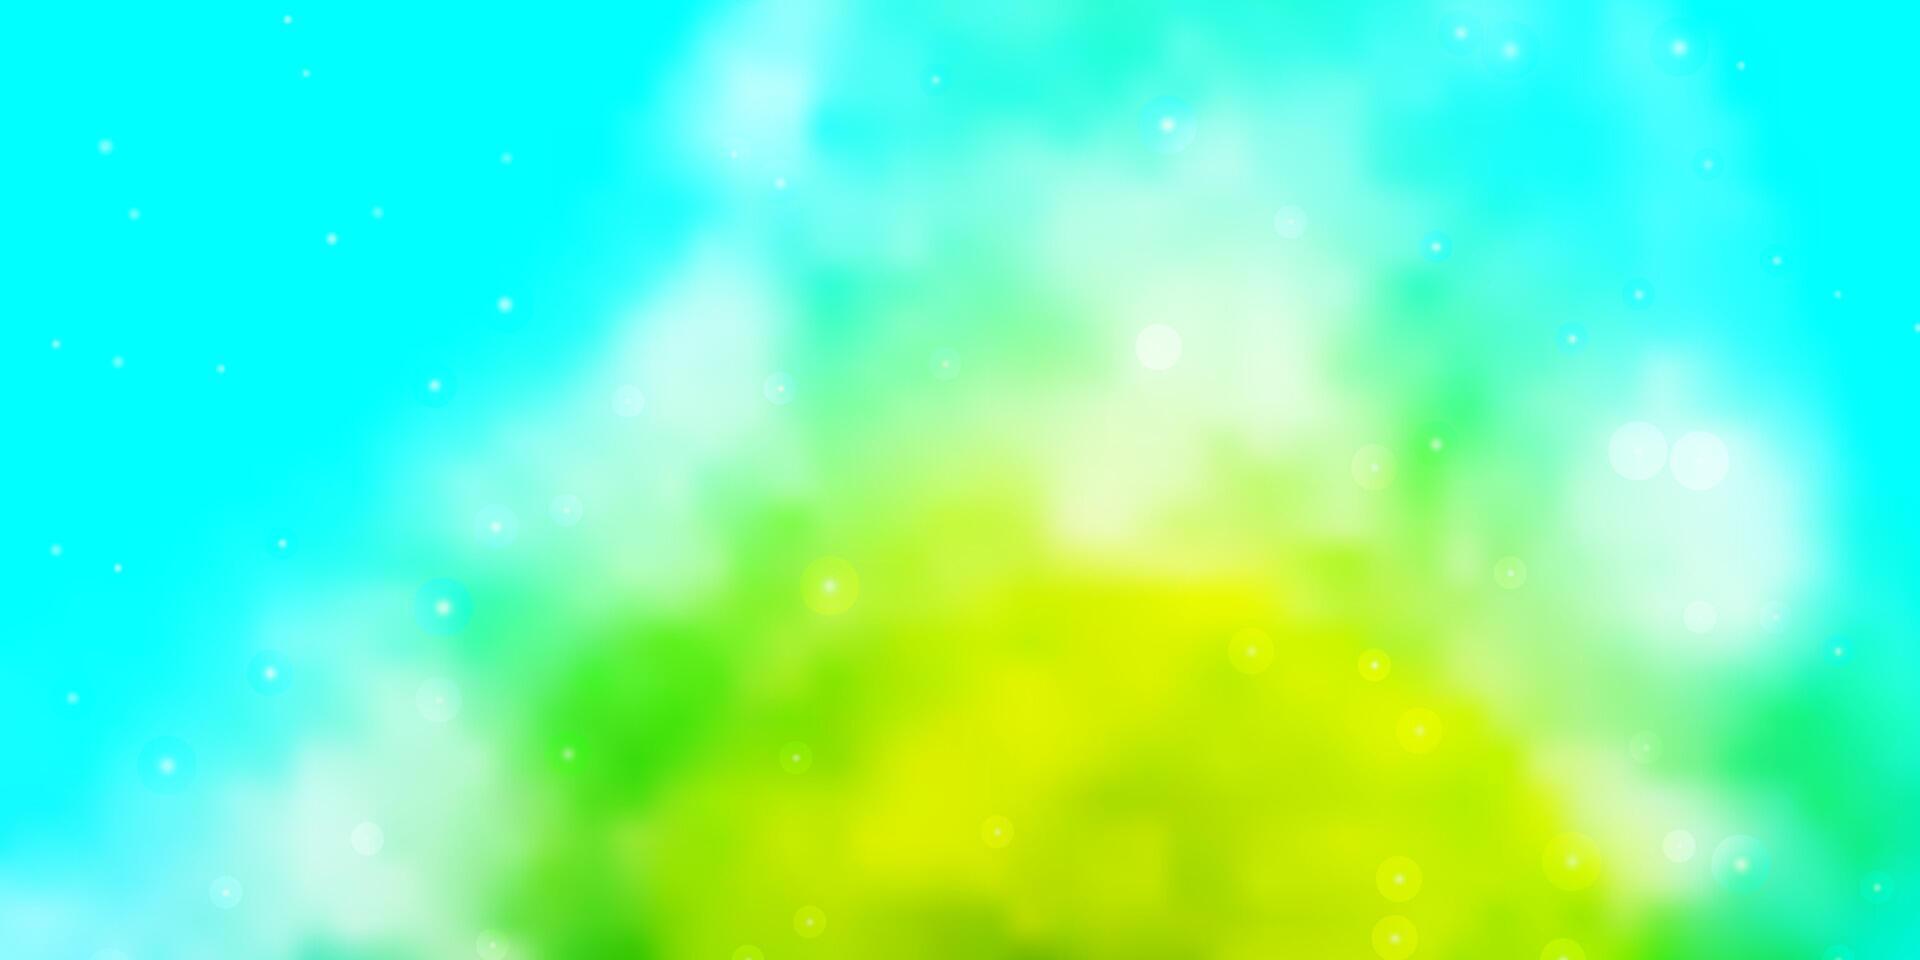 Light Blue, Green texture with beautiful stars. vector